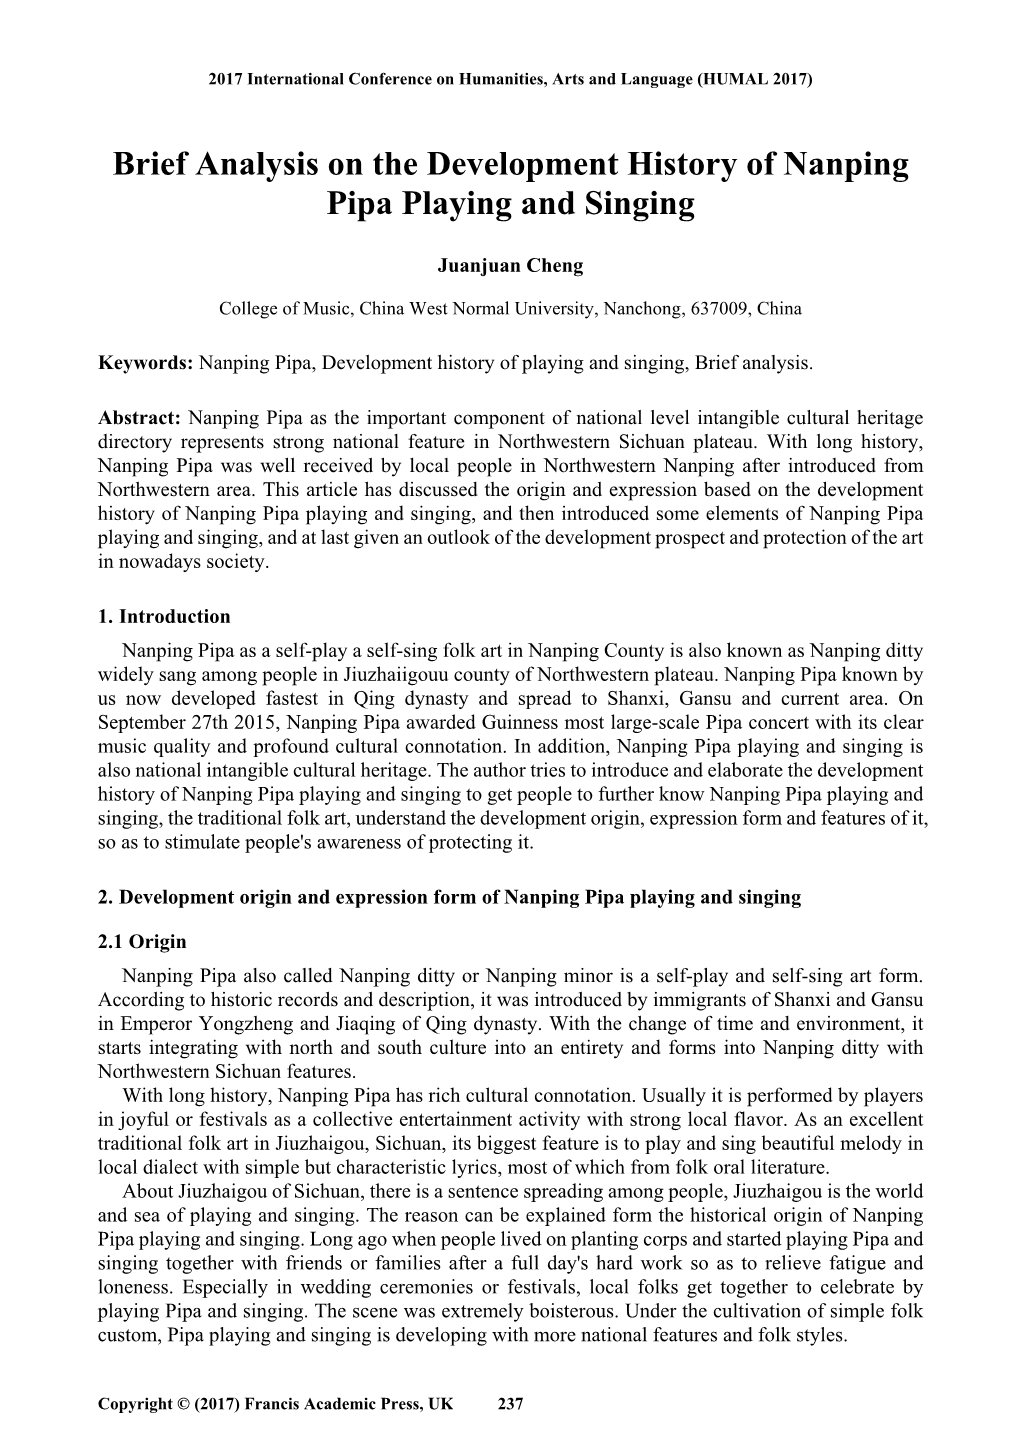 Brief Analysis on the Development History of Nanping Pipa Playing and Singing